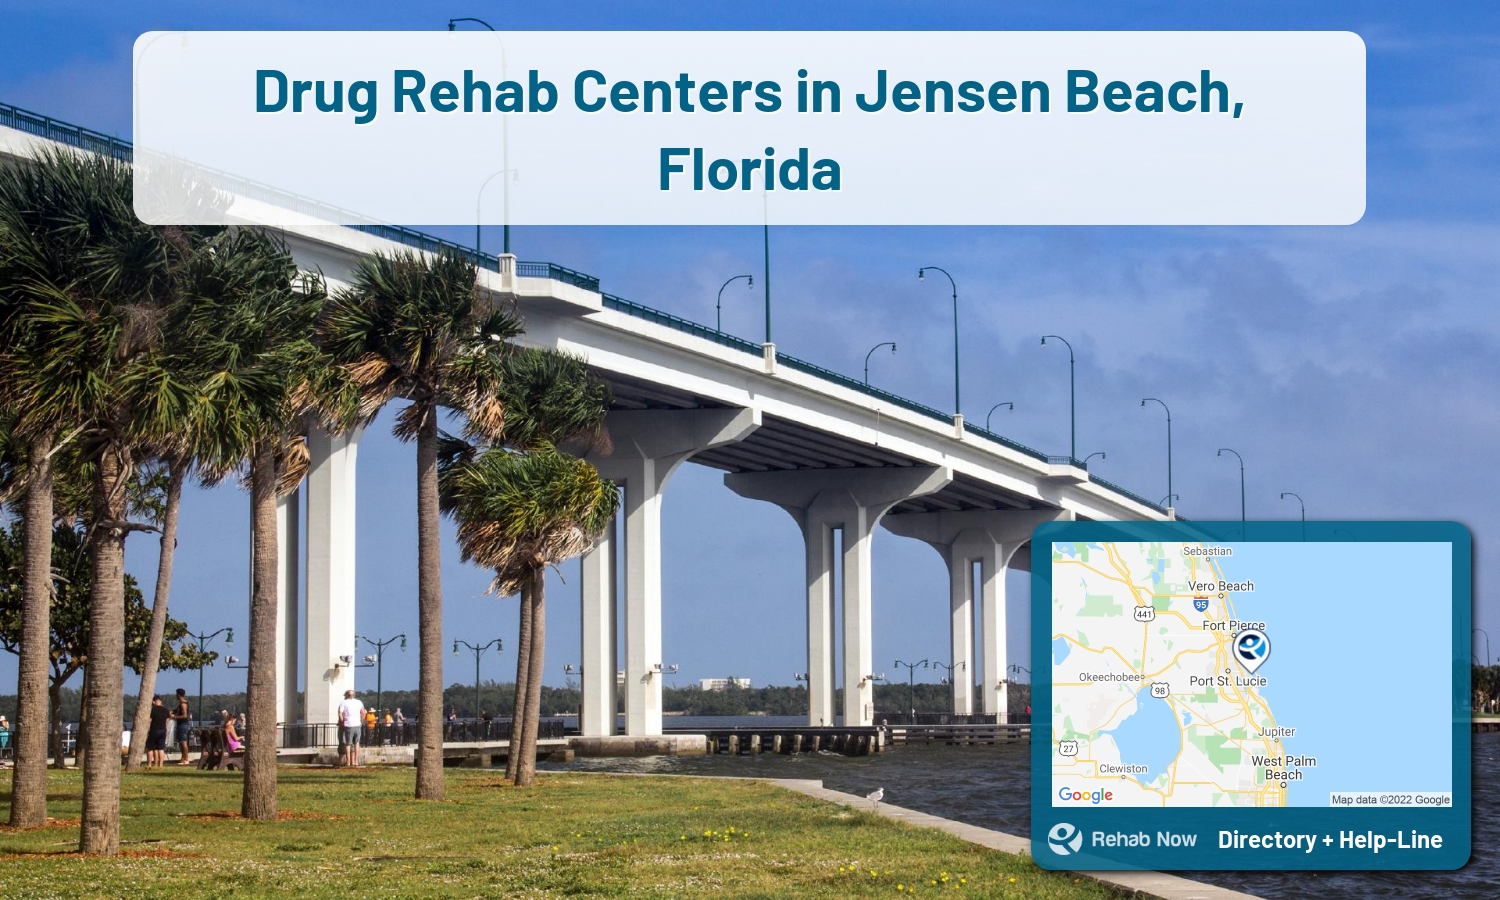 View options, availability, treatment methods, and more, for drug rehab and alcohol treatment in Jensen Beach, Florida